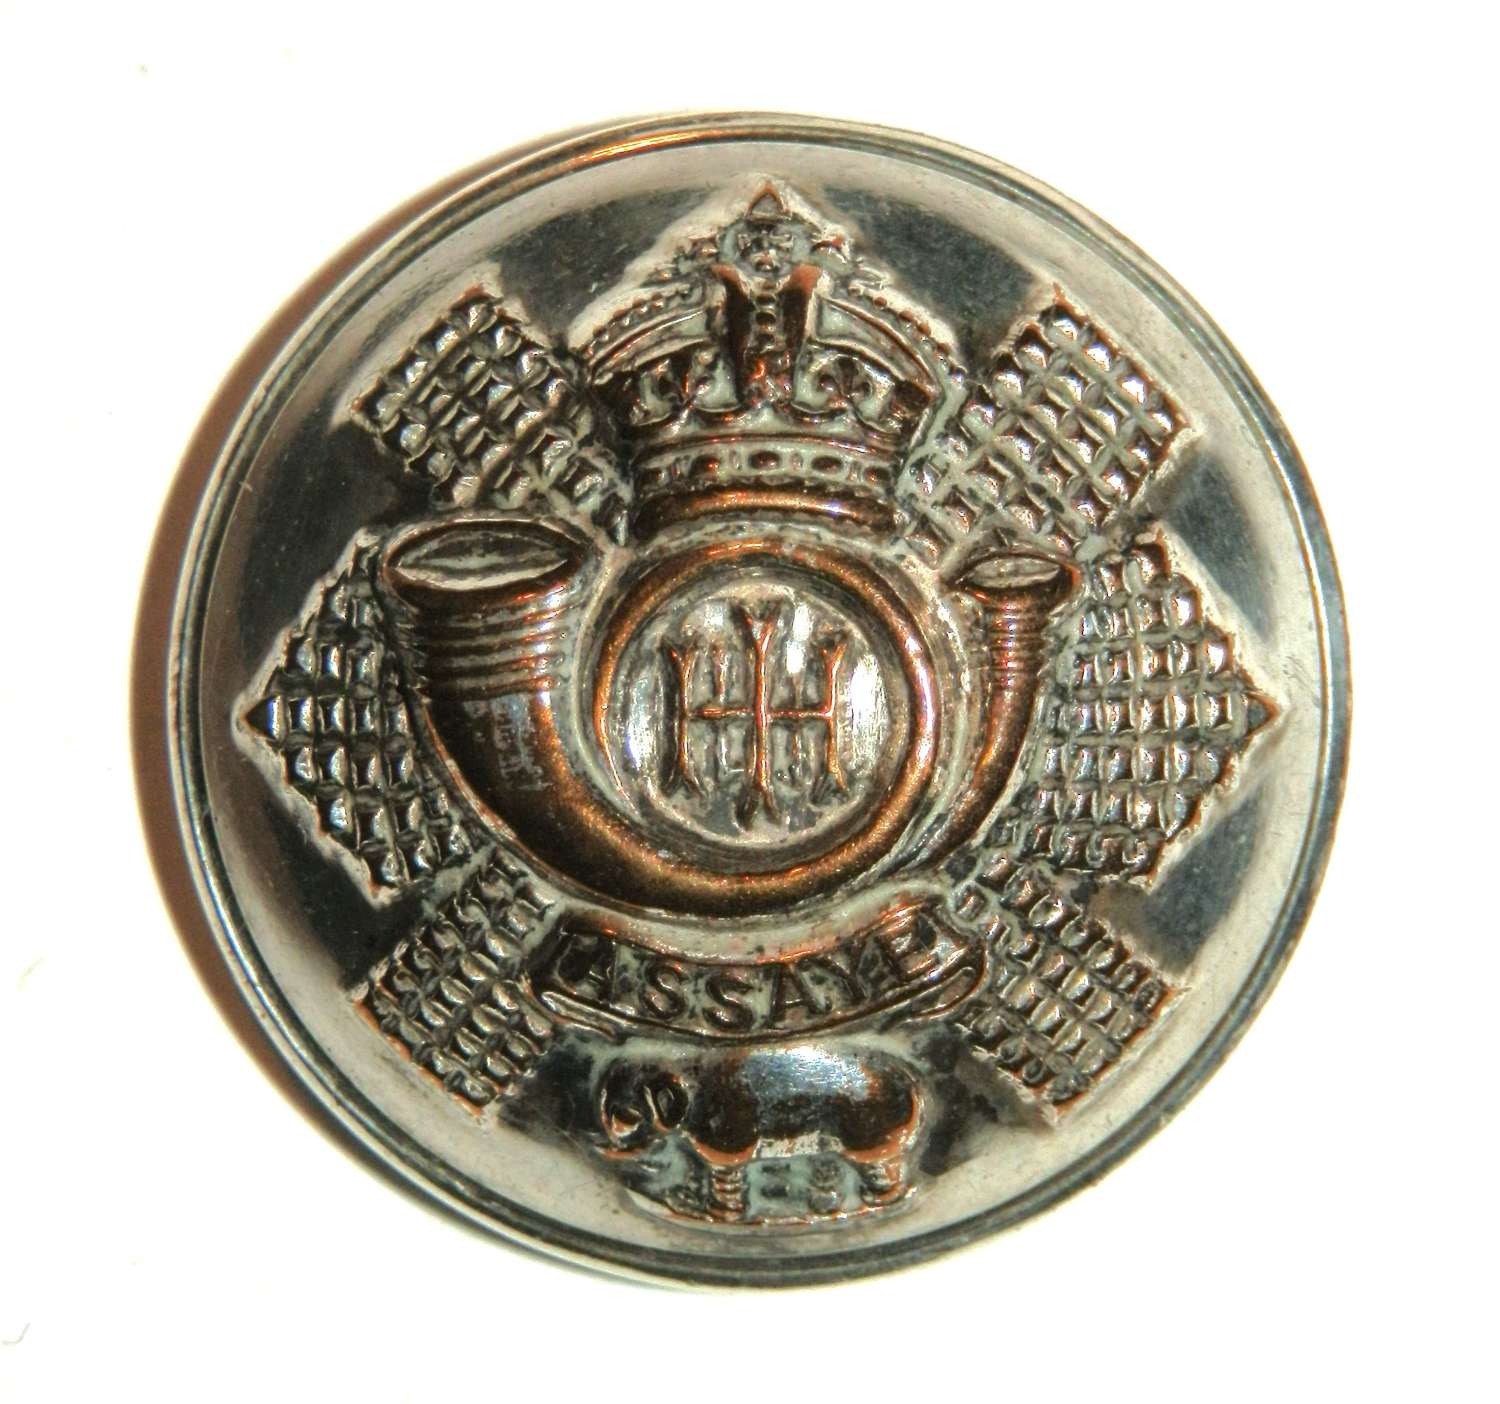 Highland L.I. (City of Glasgow Regt.) Officers Silvered Button.